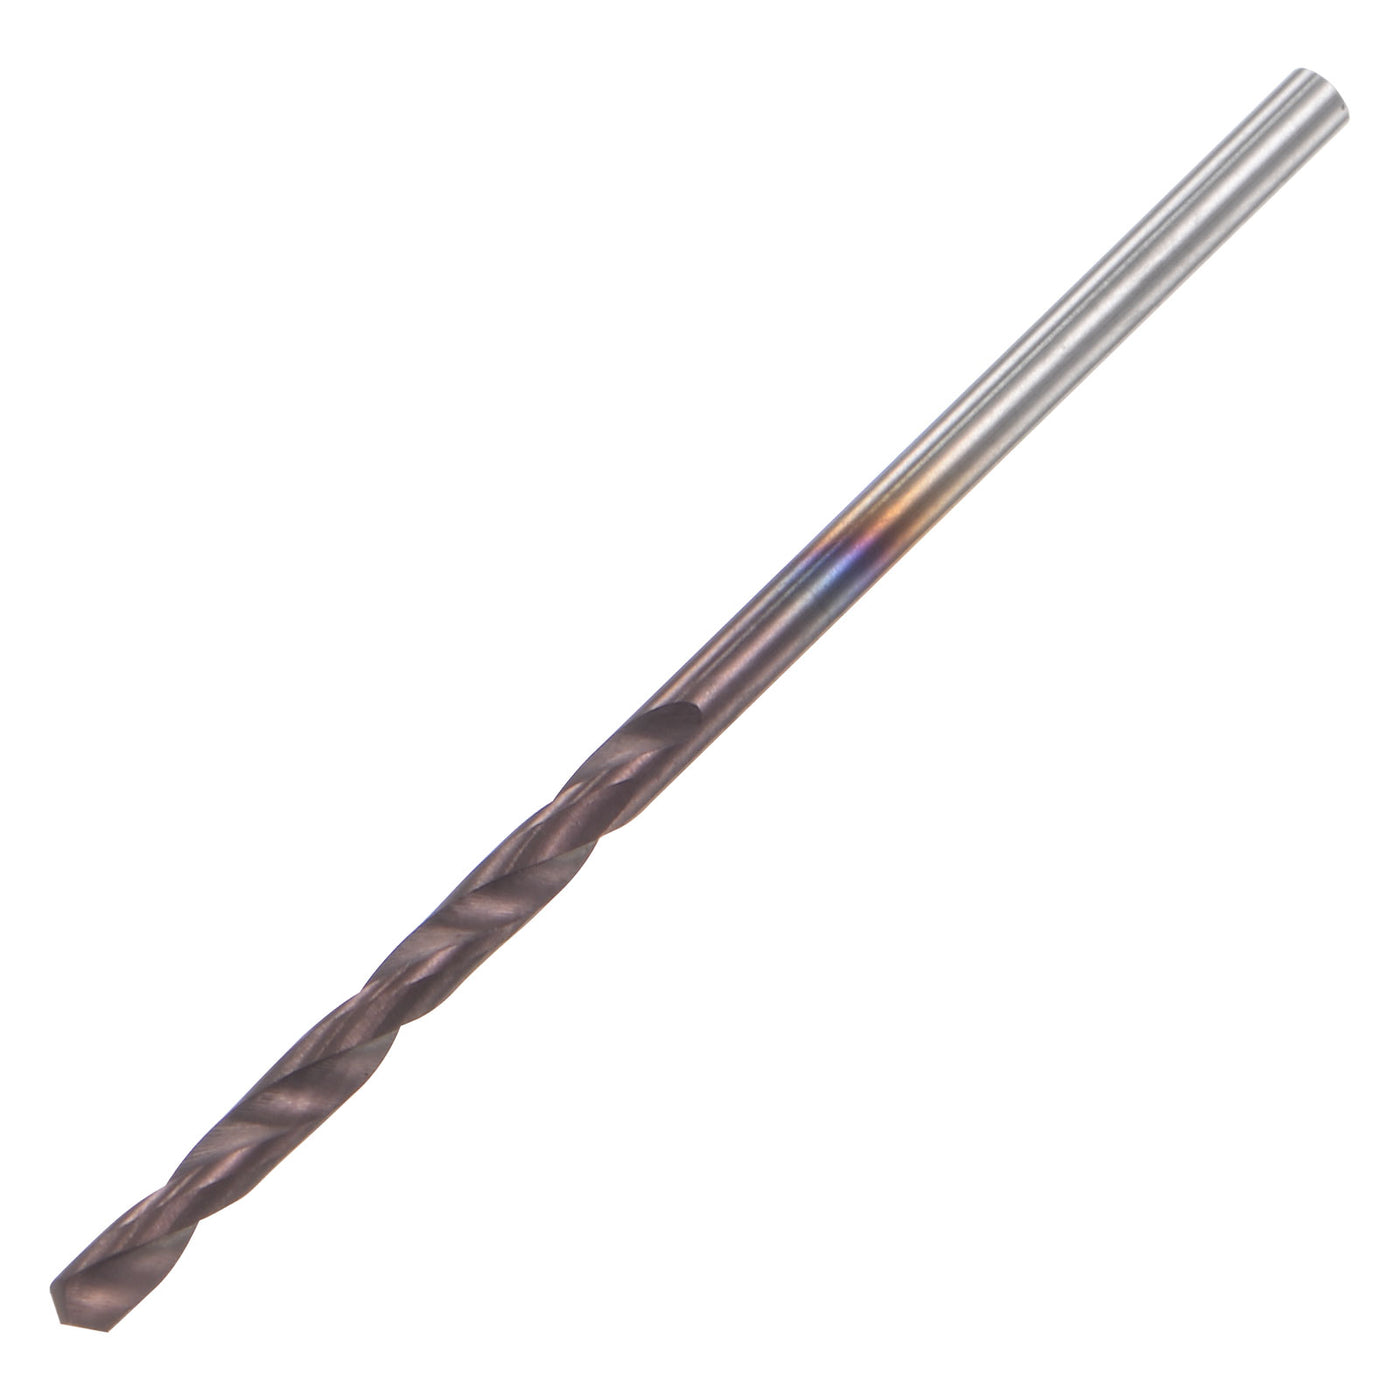 uxcell Uxcell 1.6mm DIN K45 Tungsten Carbide AlTiSin Coated Drill Bit for Stainless Steel